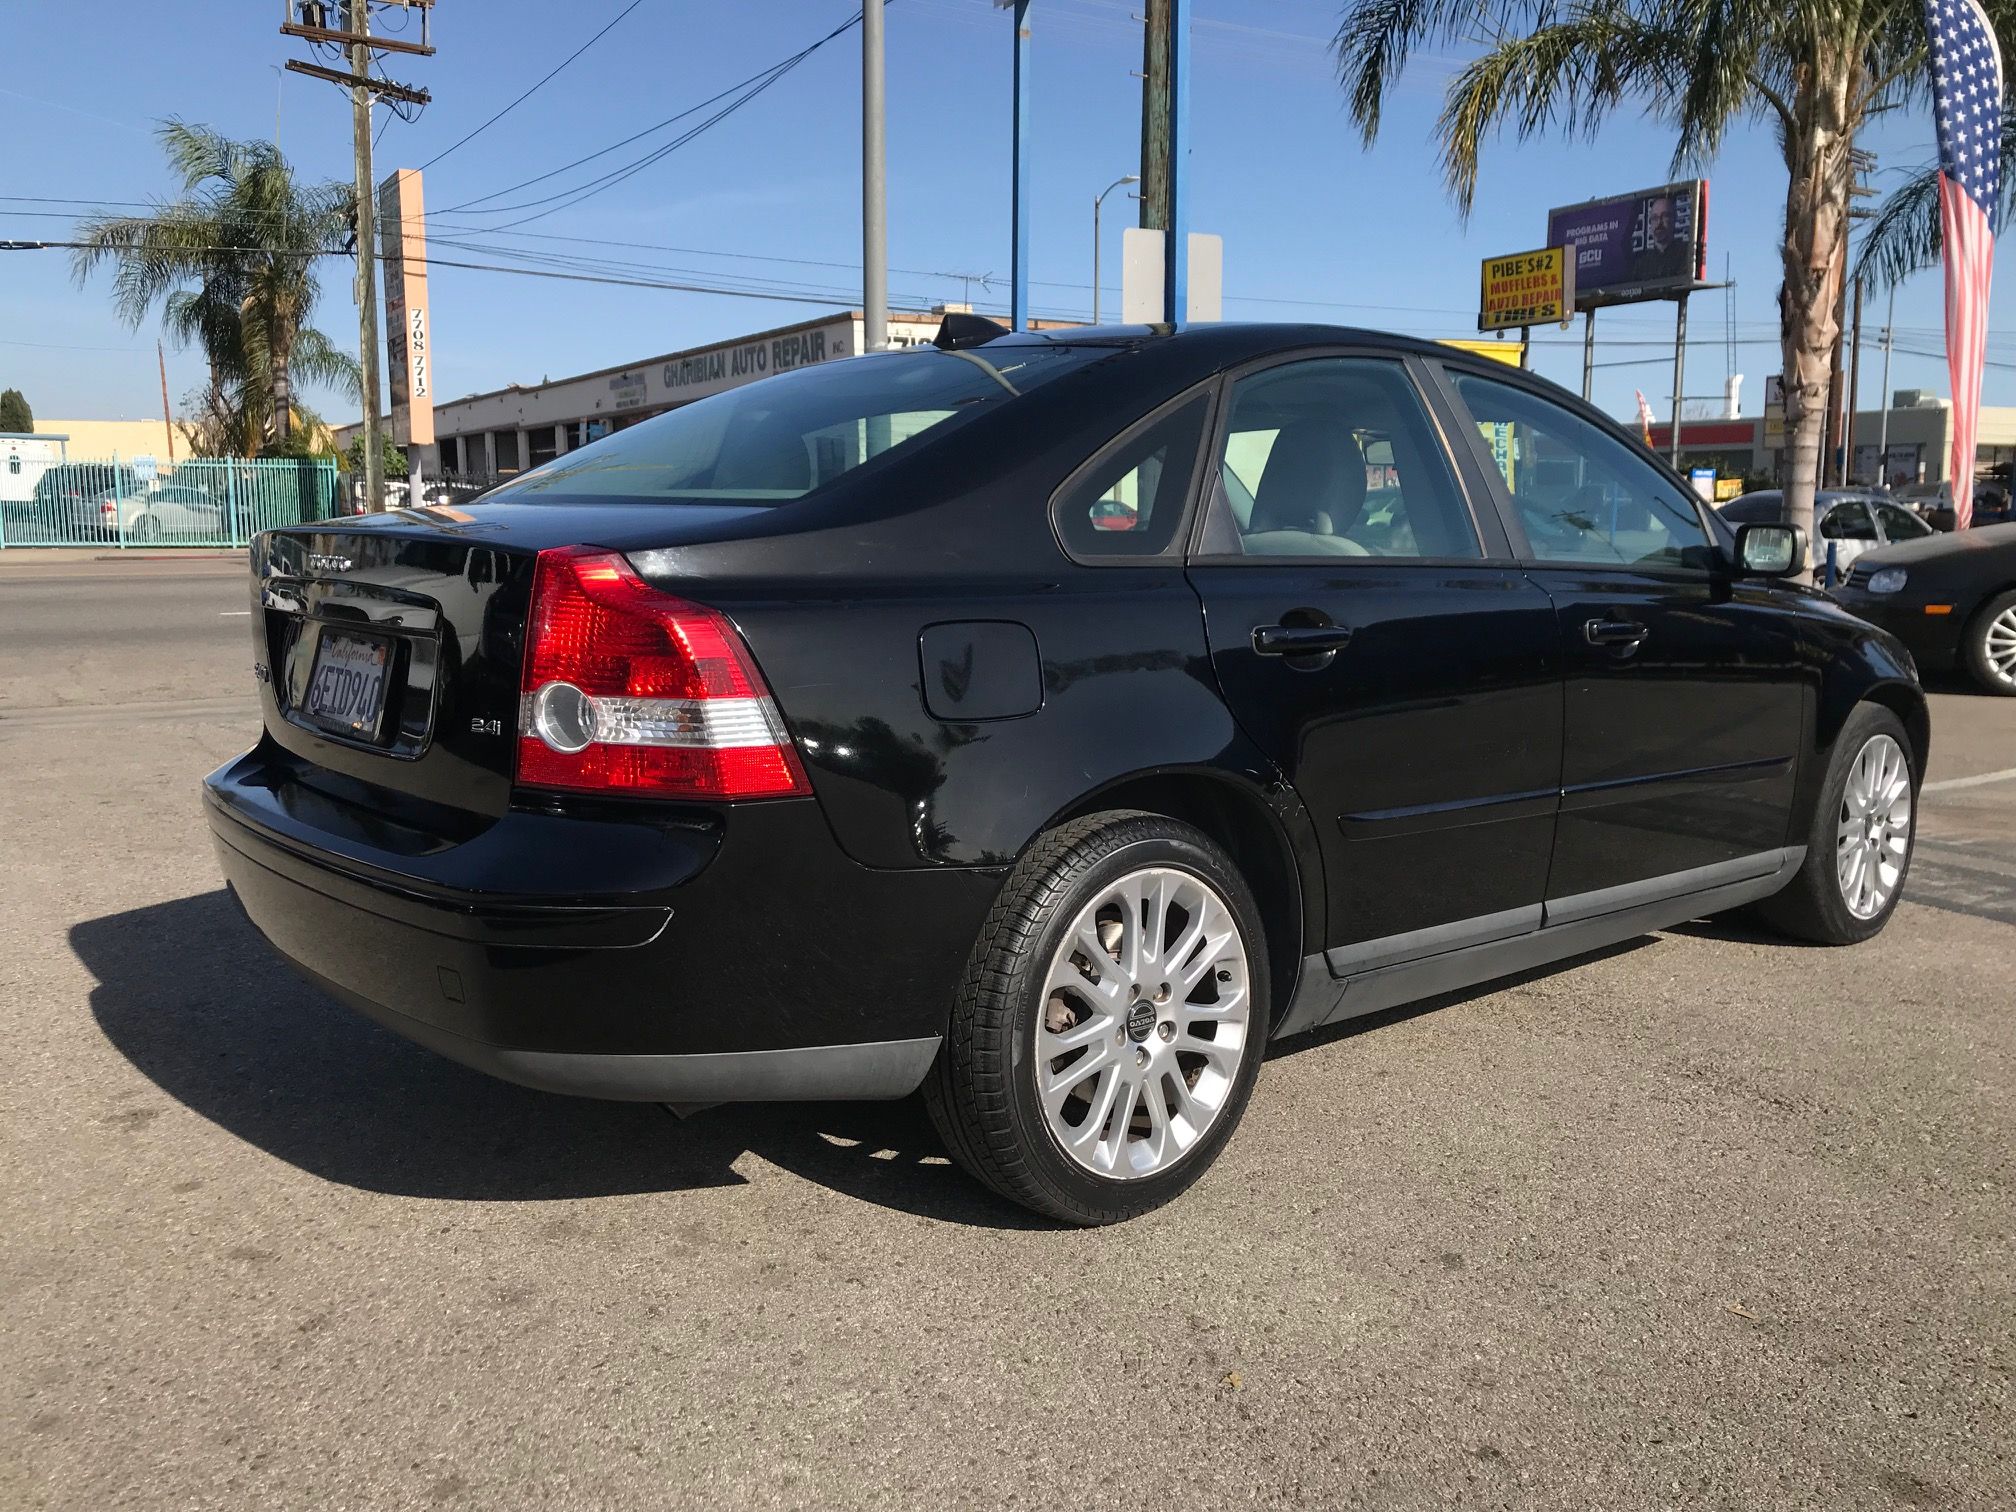 Used 2005 Volvo S40 at City Cars Warehouse INC